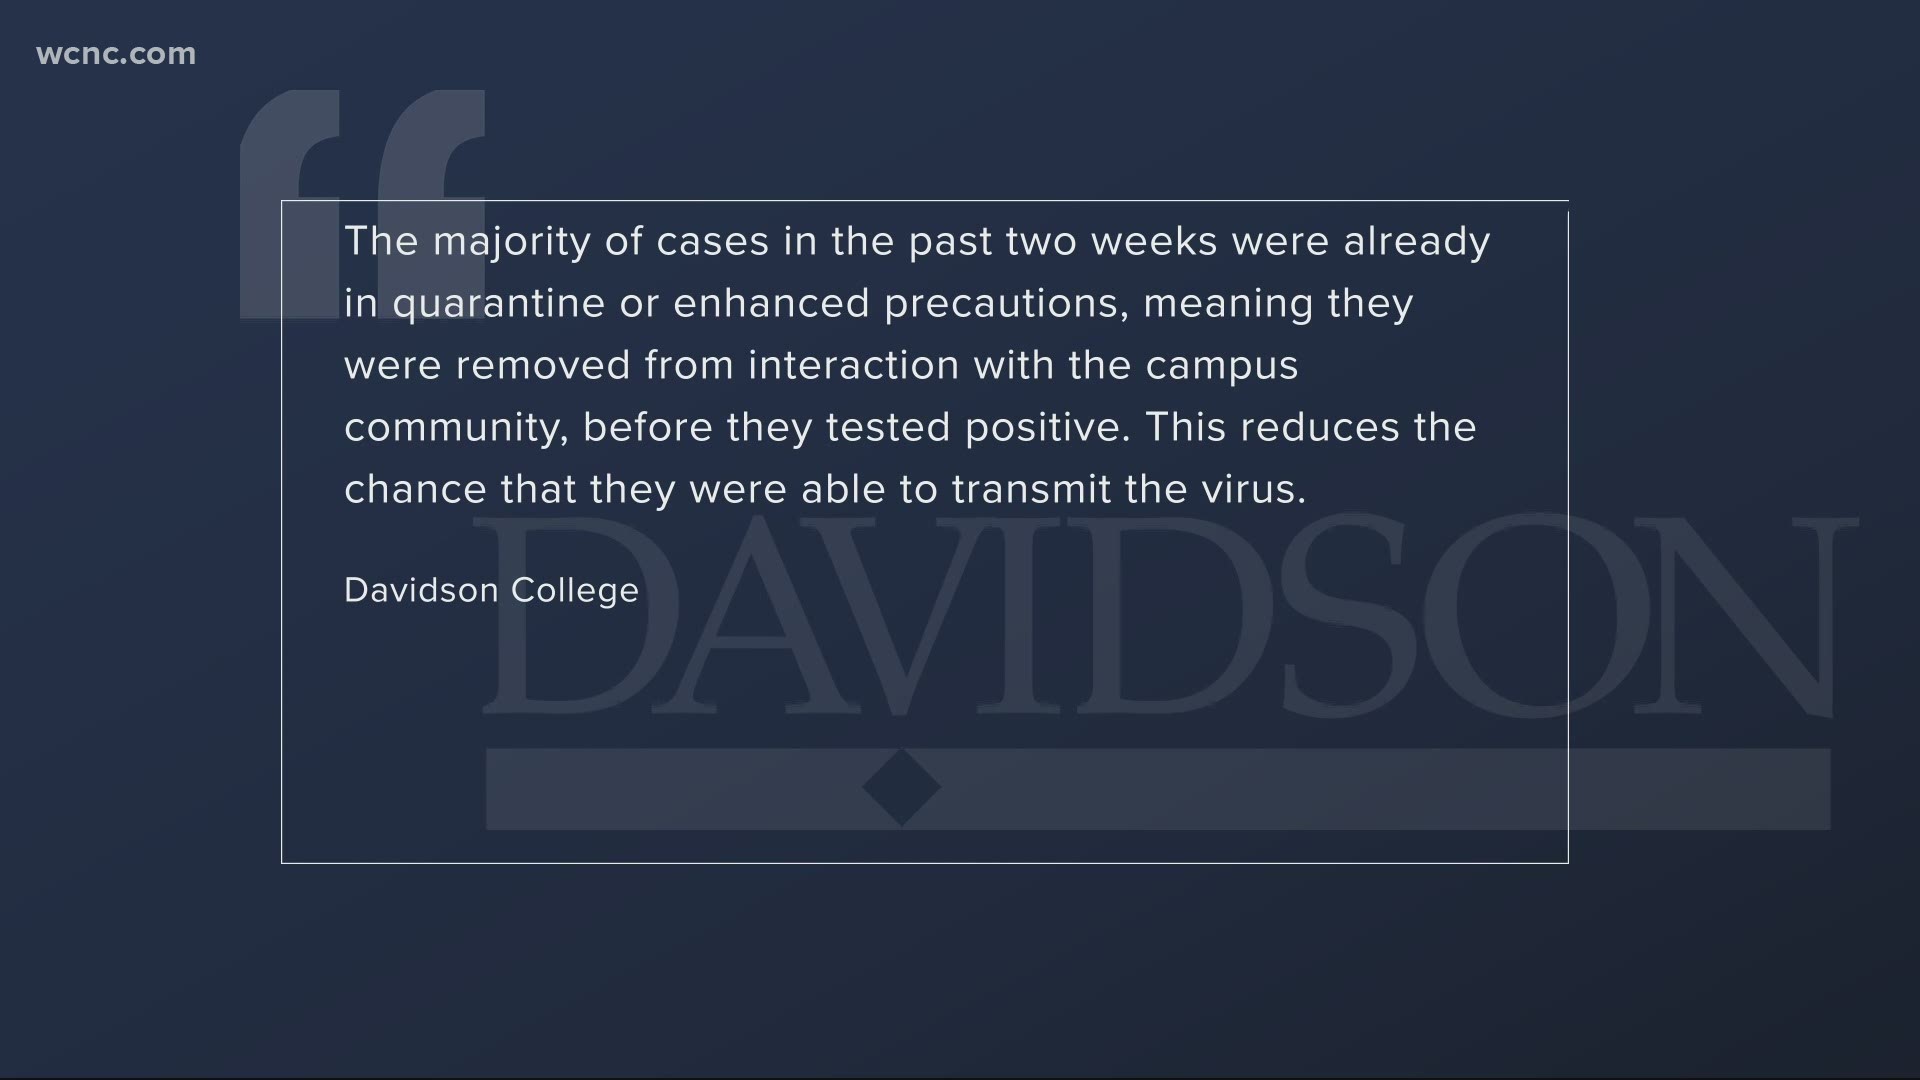 On Wednesday, Davidson College sent an email to students about the confirmed cases of the UK variant.